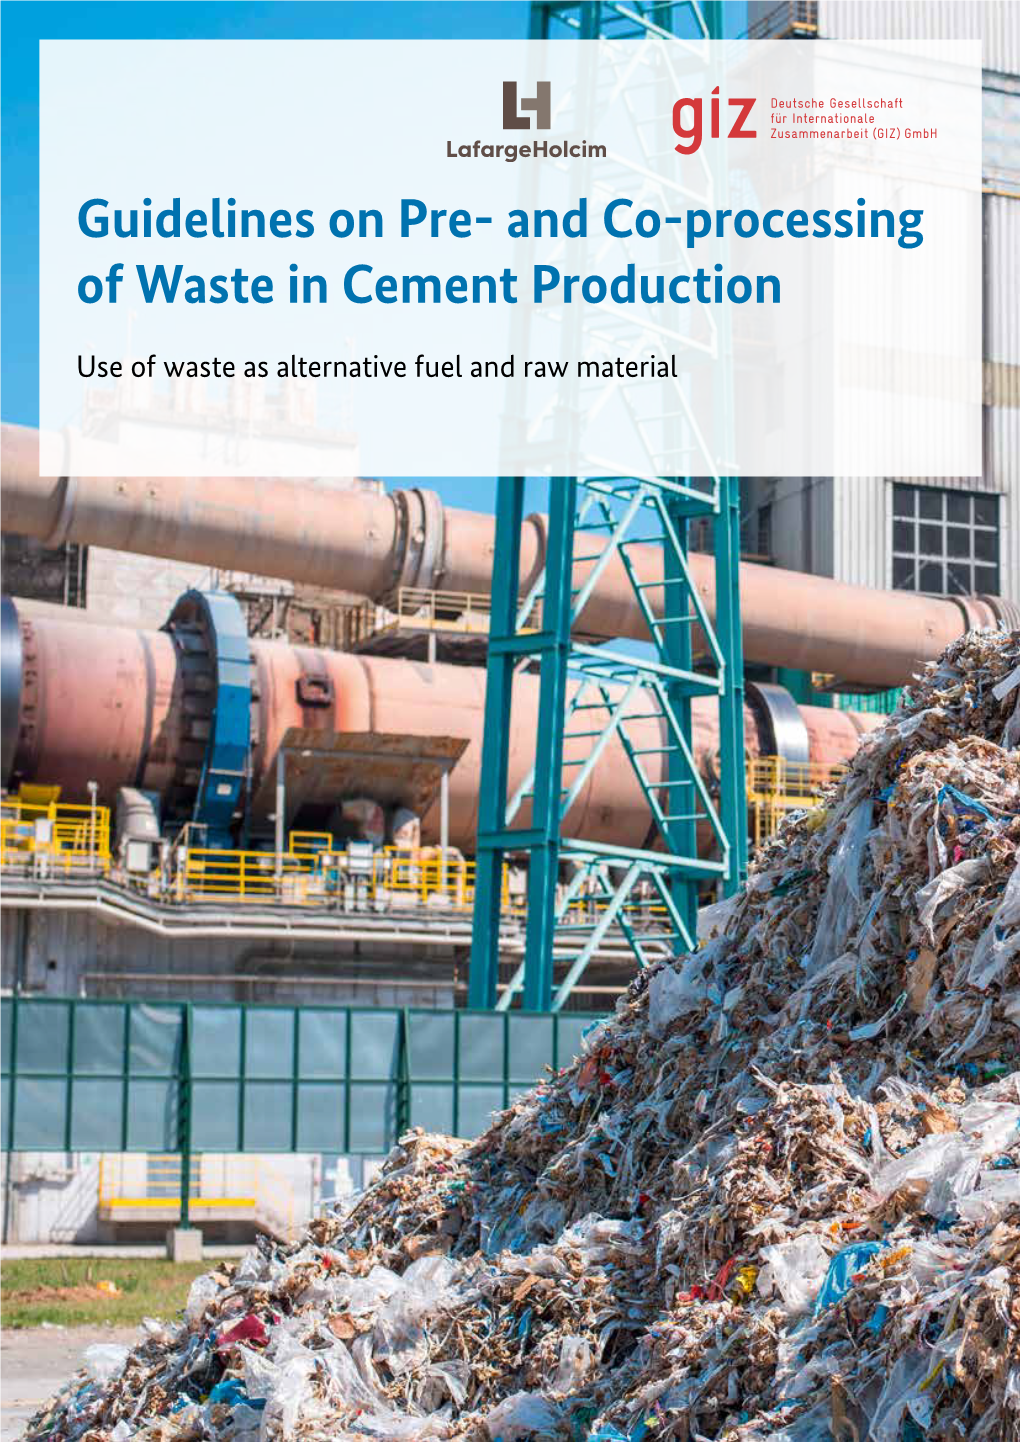 Guidelines on Pre- and Co-Processing of Waste in Cement Production